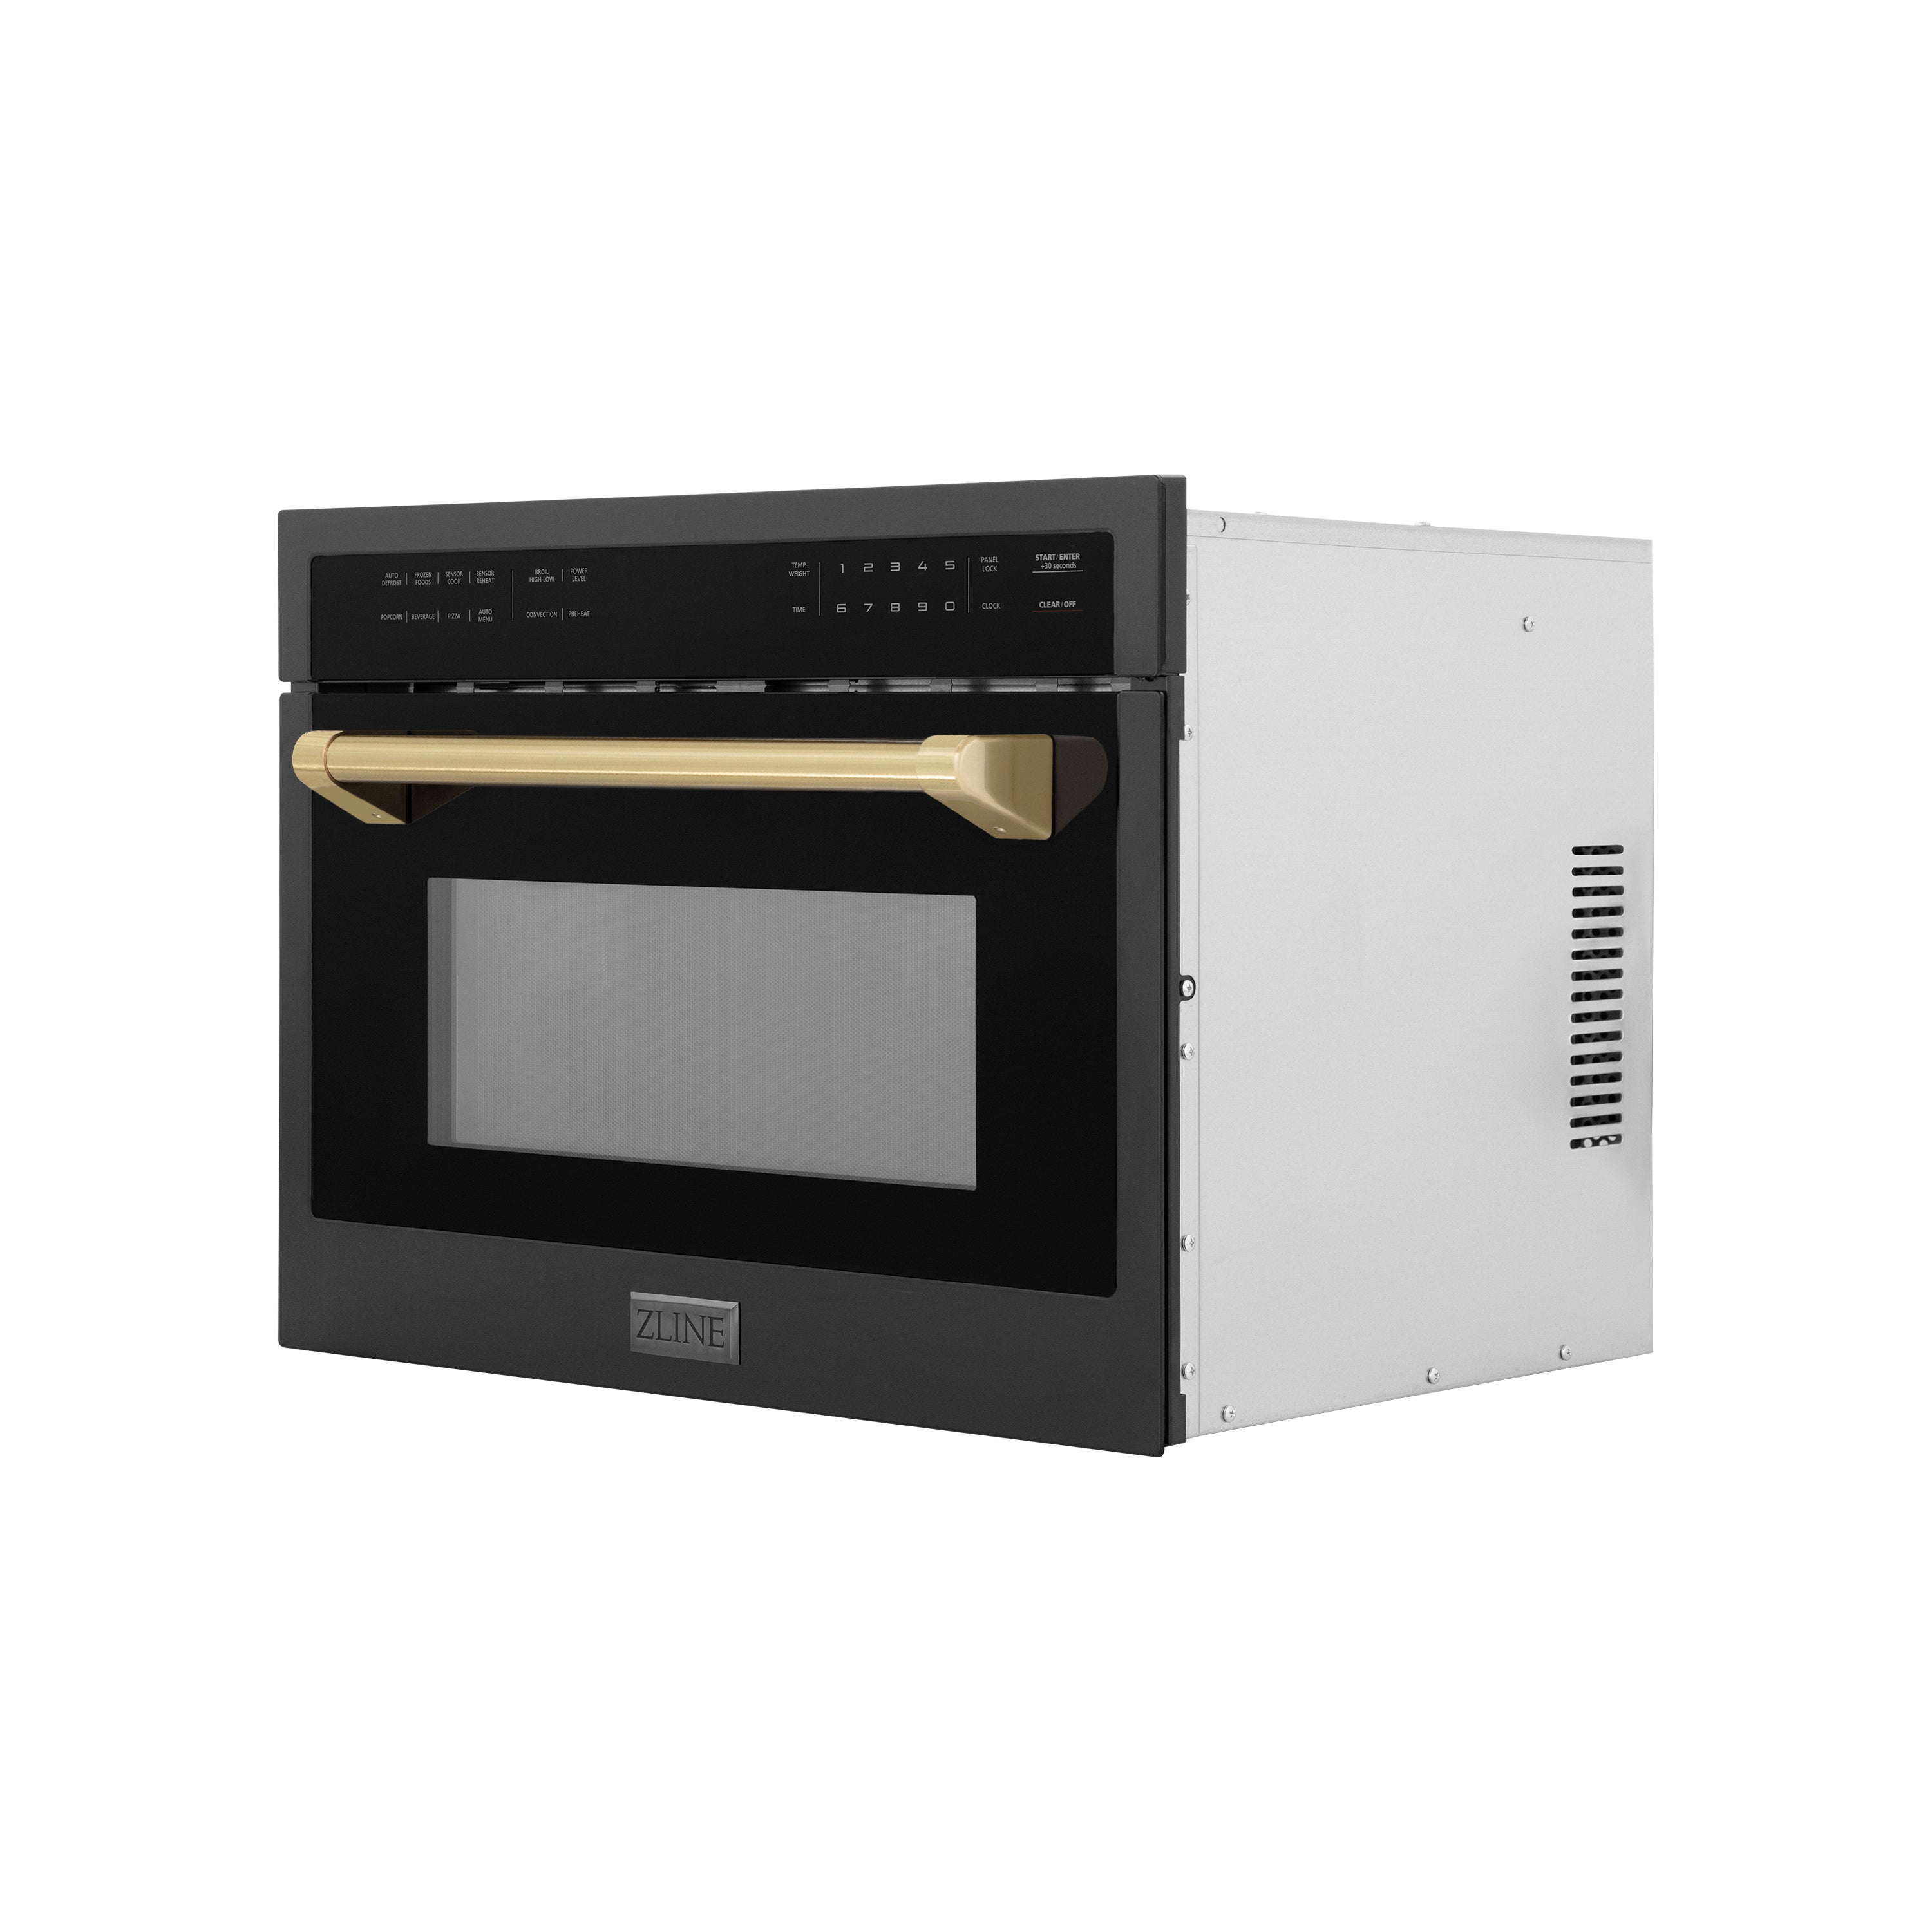 ZLINE Autograph Edition 24 in. 1.6 cu ft. Built-in Convection Microwave Oven in Black Stainless Steel with Champagne Bronze Accents (MWOZ-24-BS-CB) Side View Door Closed